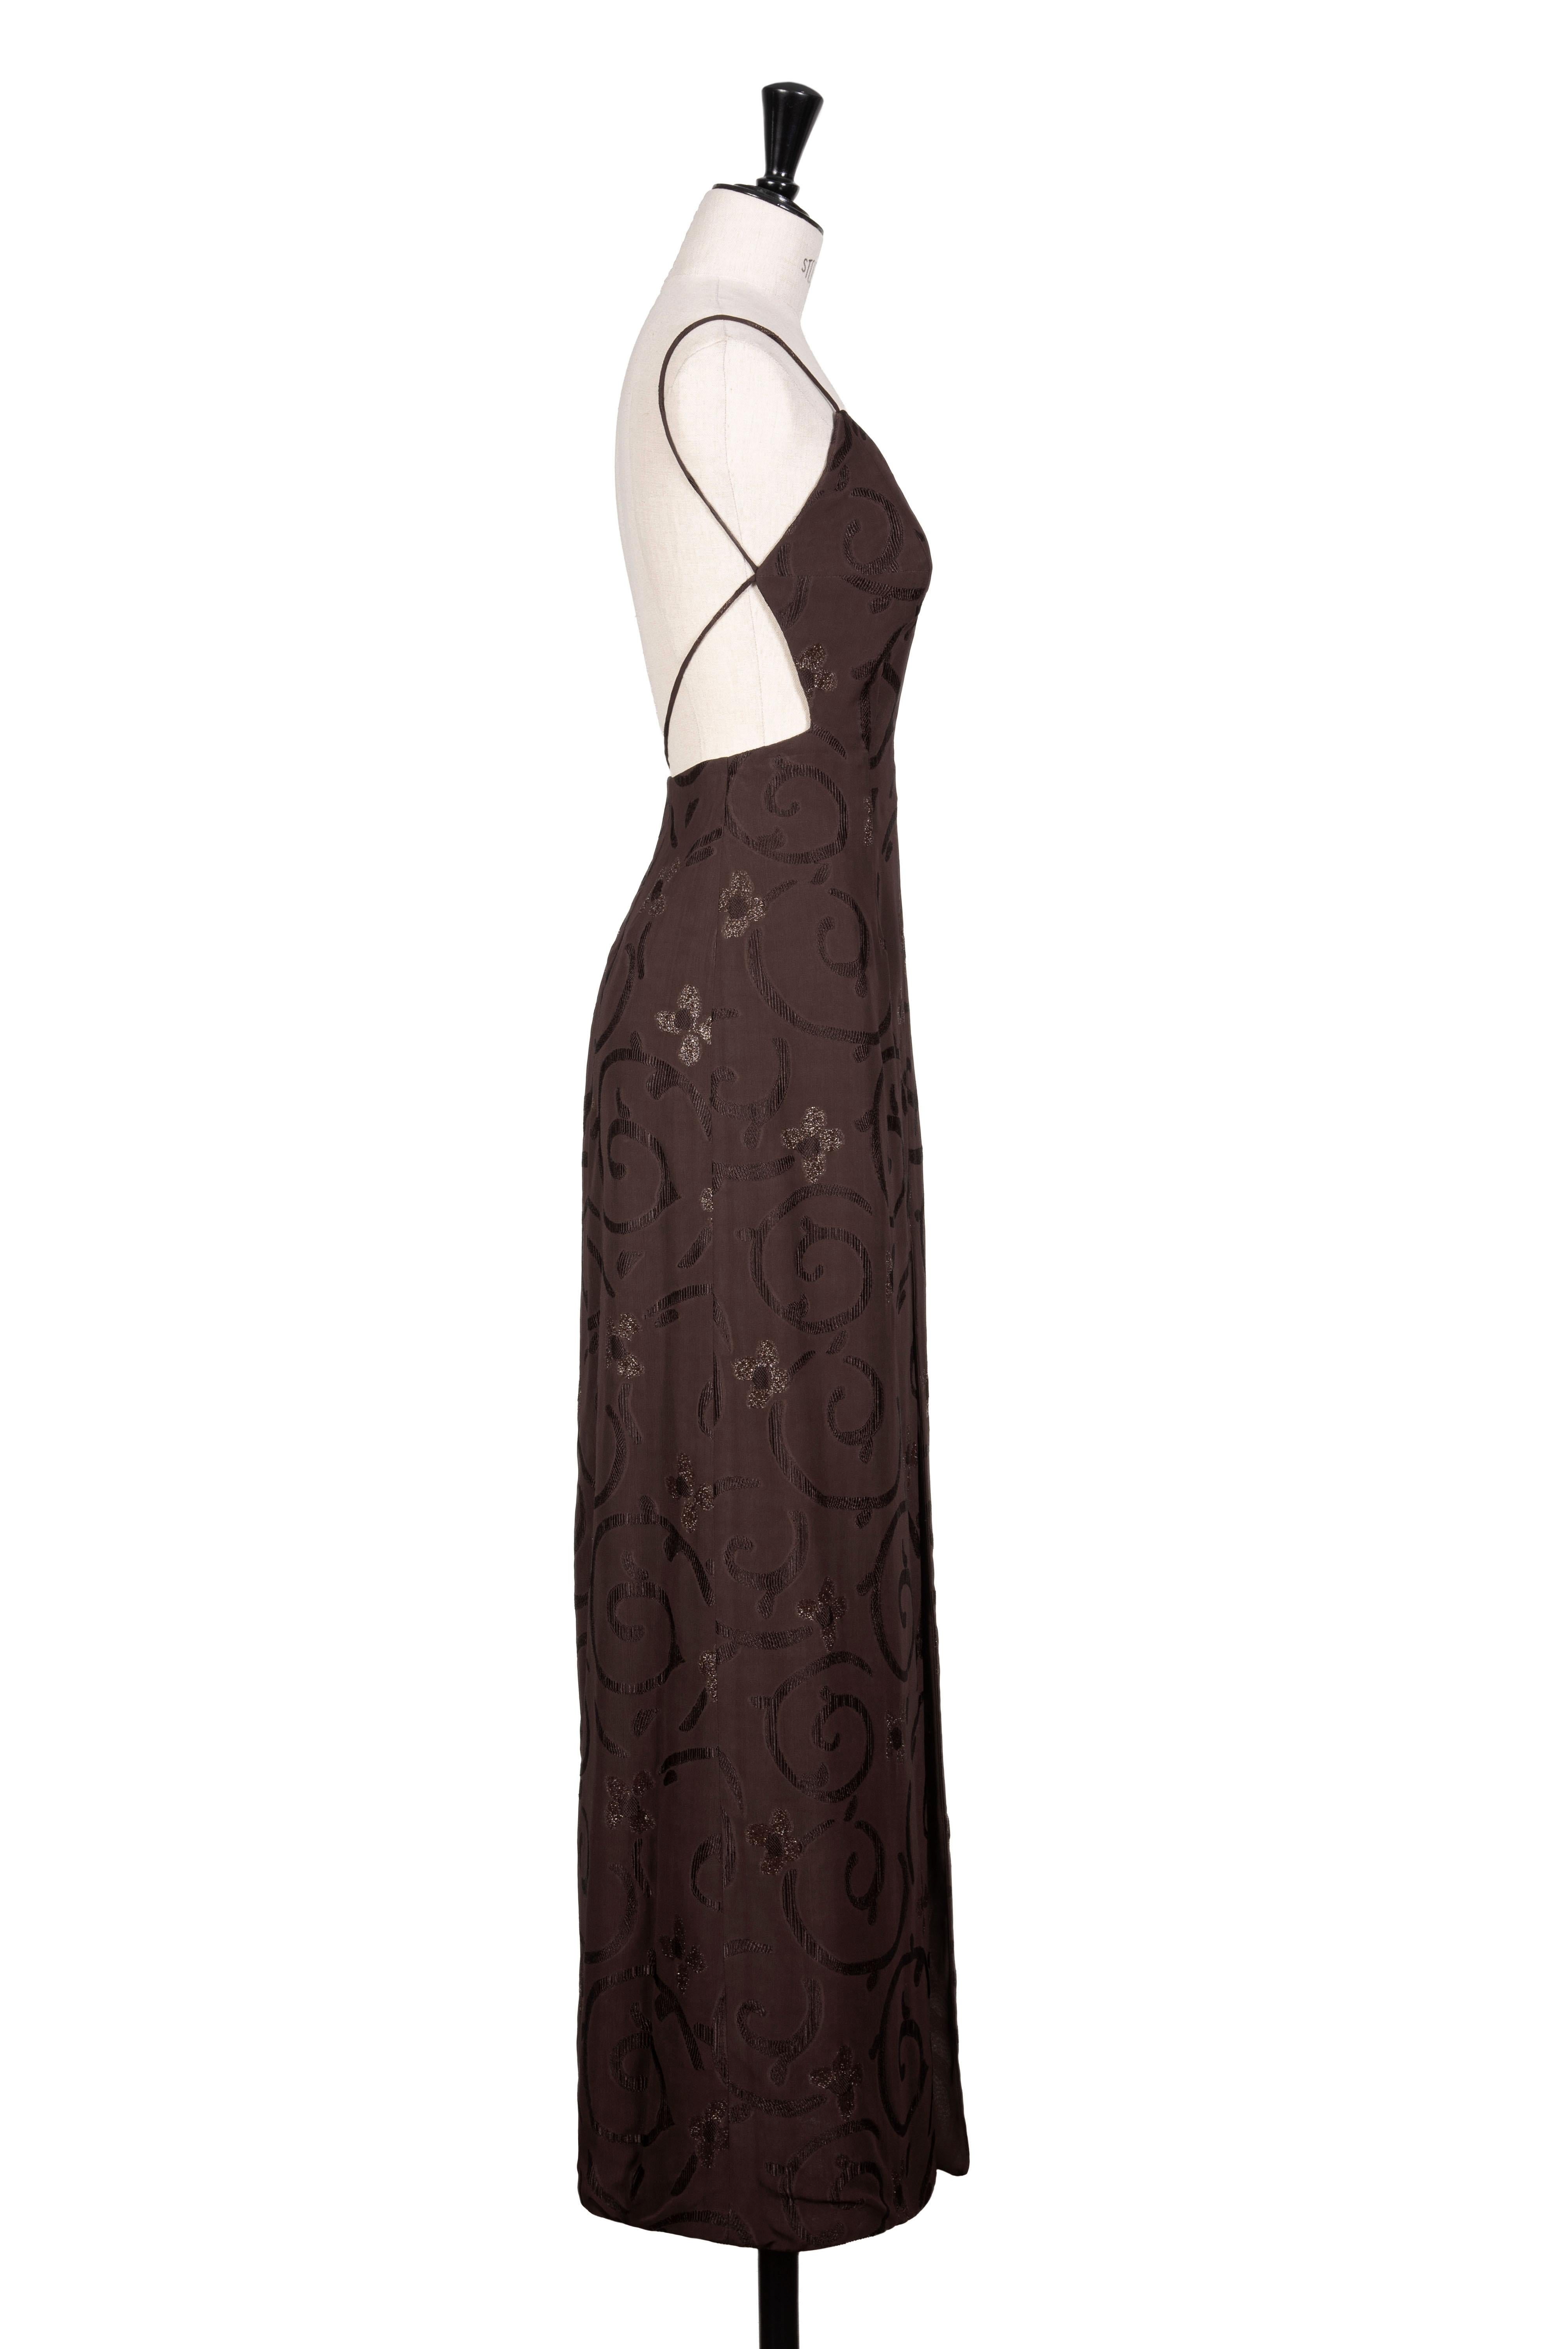 Spring 1997 GIORGIO ARMANI Runway & Ad Campaign Brown Backless Maxi Dress For Sale 2